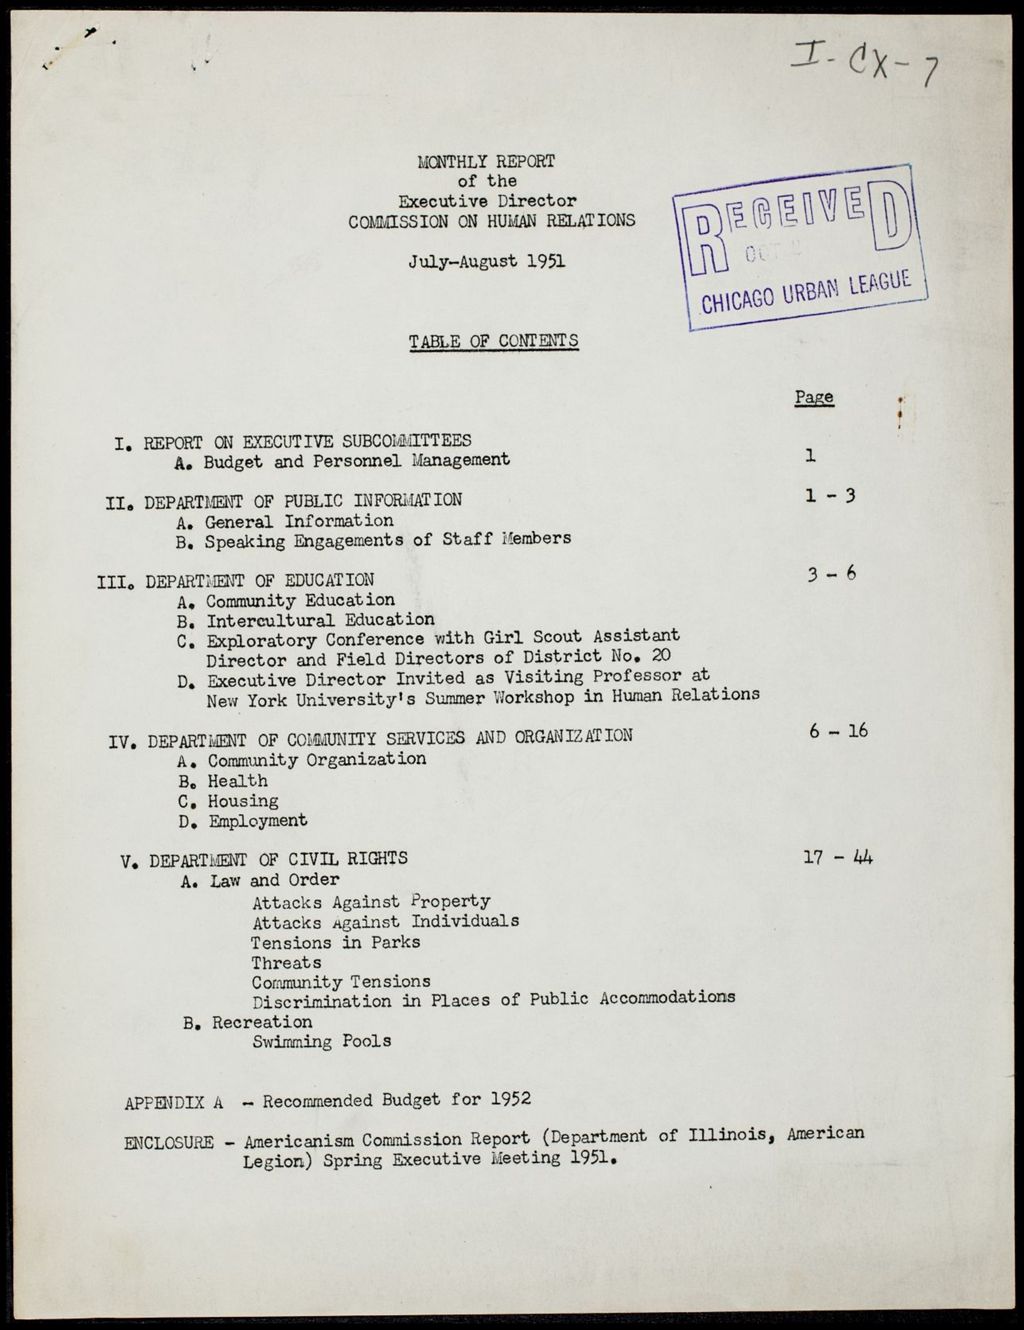 Miniature of Chicago Commission on Human Relations Executive Director reports, 1951 (Folder I-2794)